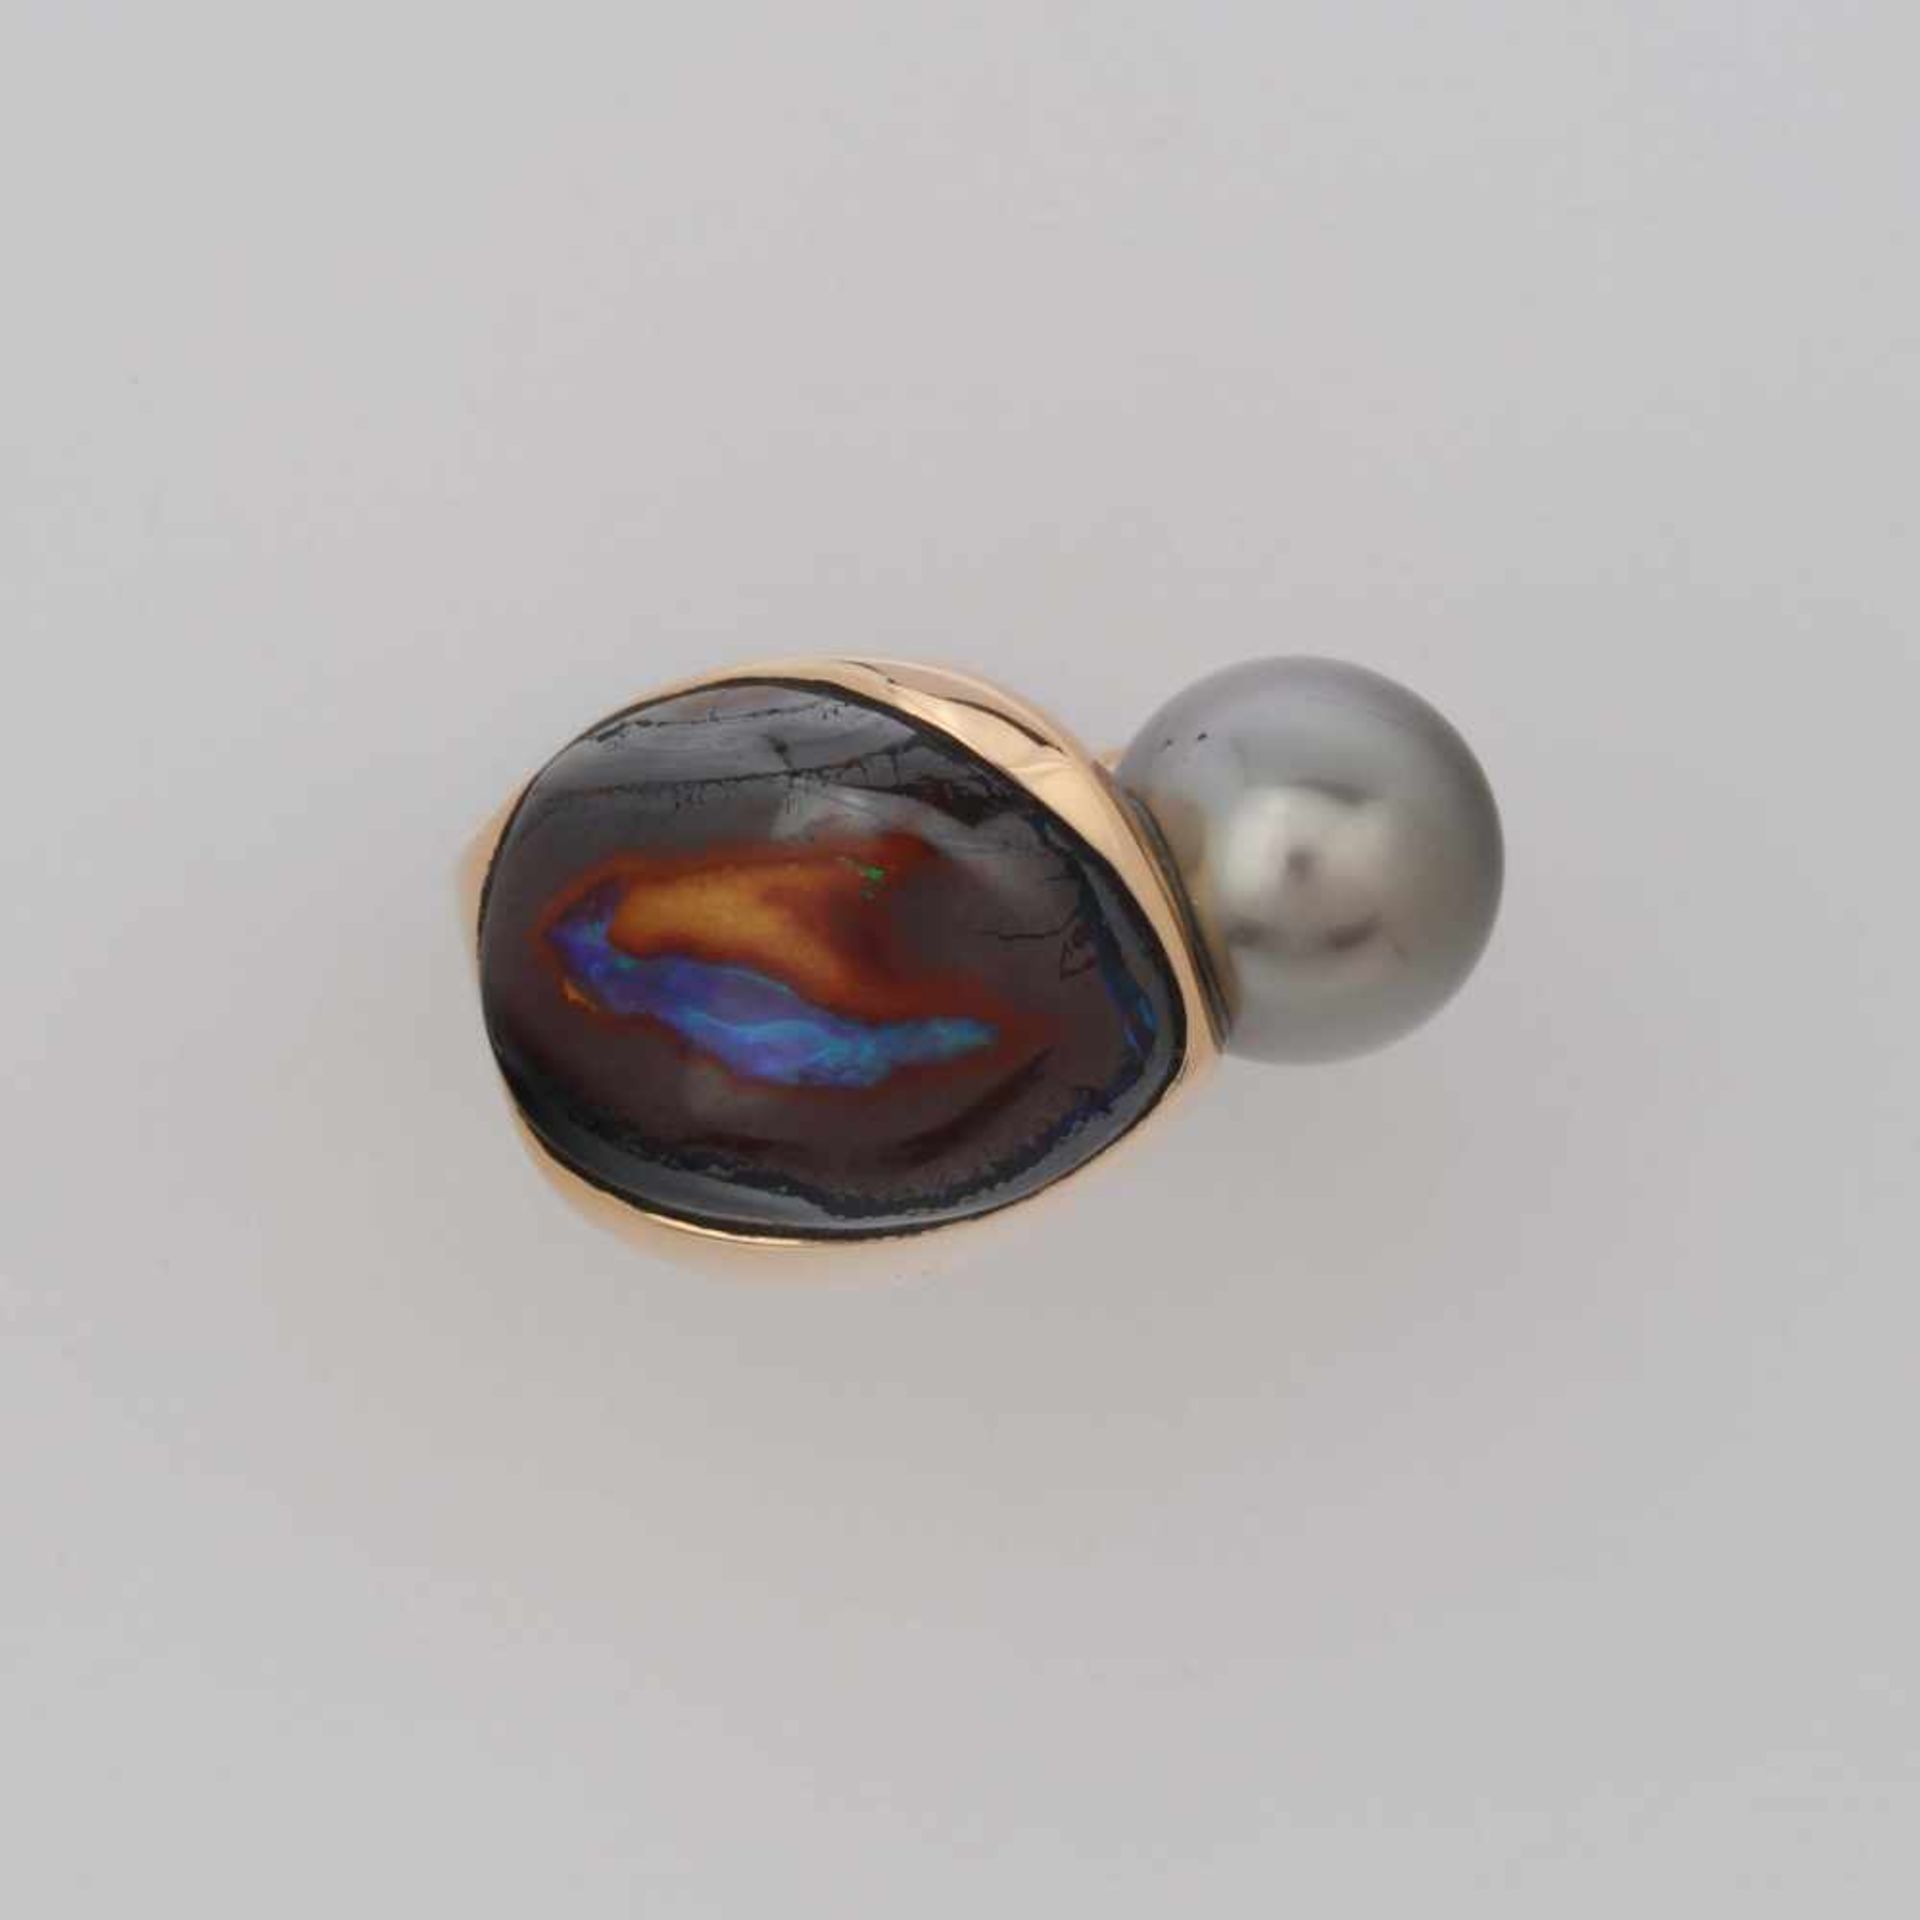 BOULDER OPAL AND PEARL RING, ARMIN SCHELLING